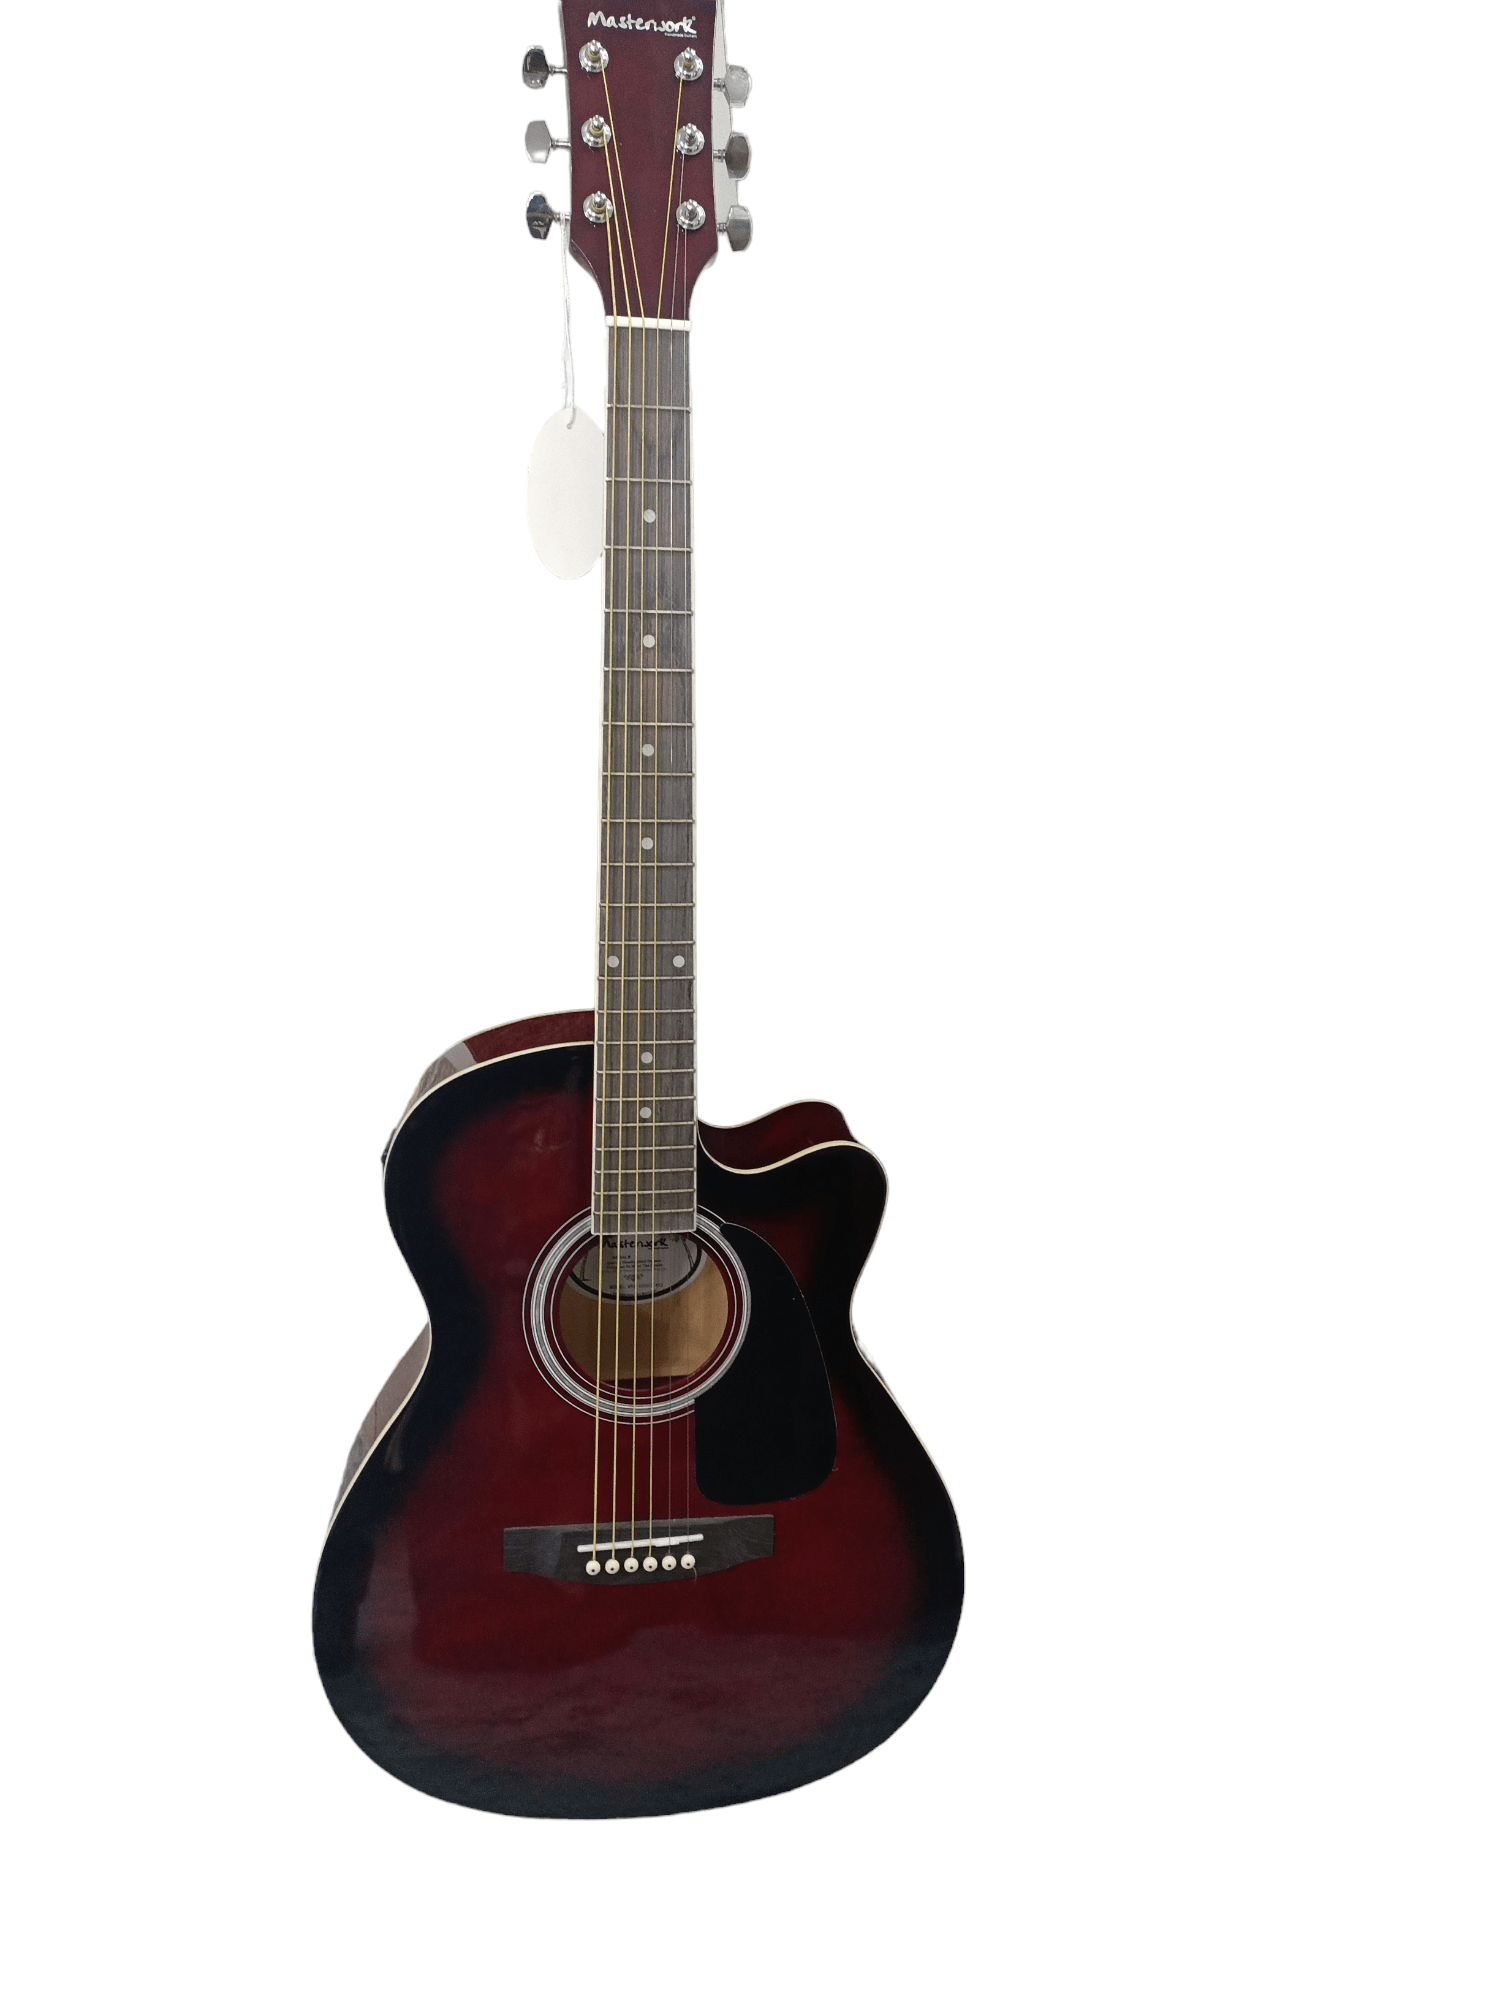 Masterwork electro acoustic guitar with USB input